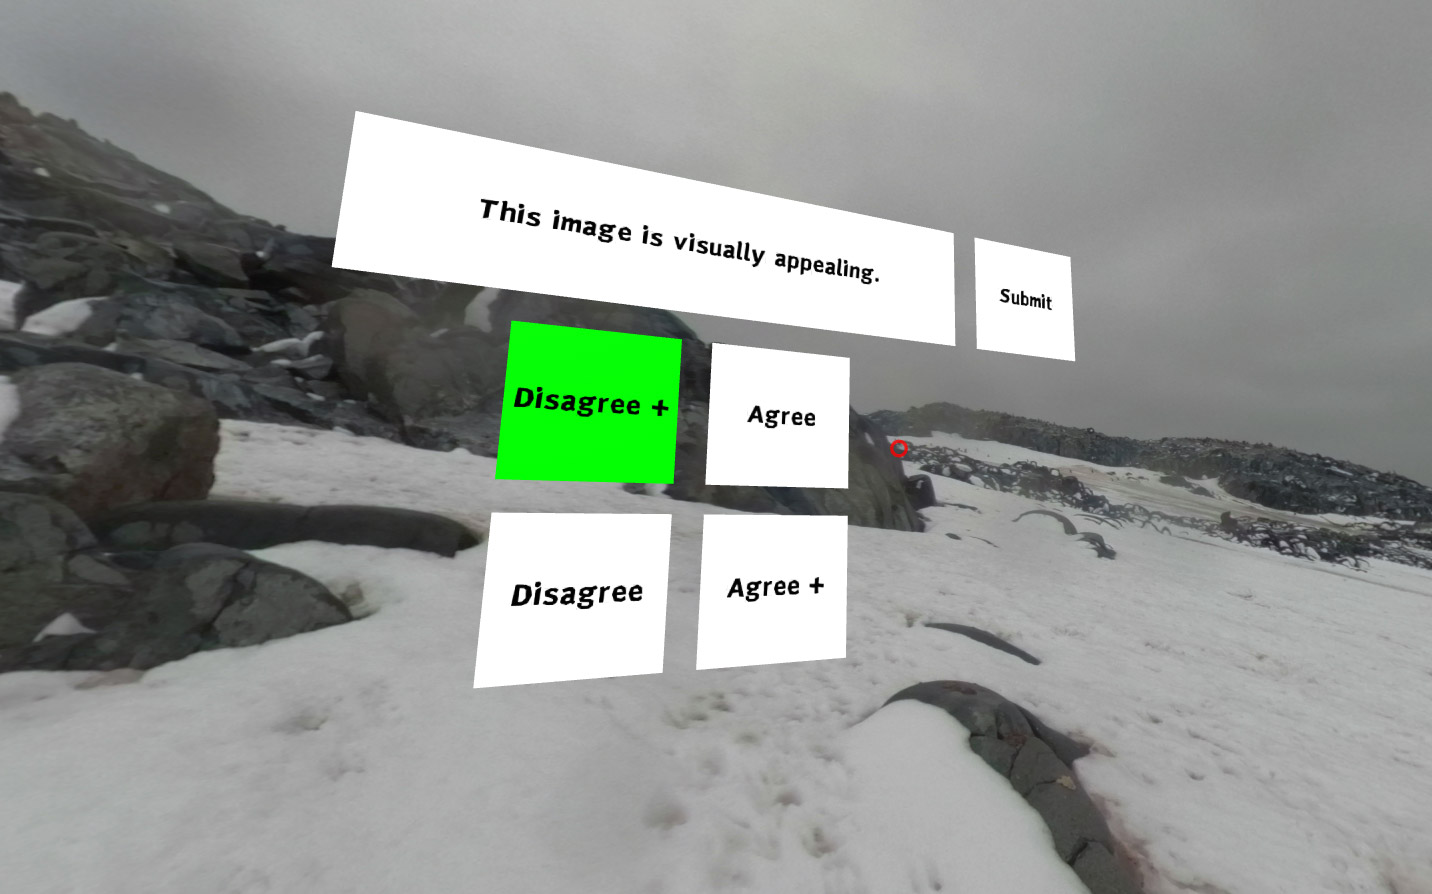 Figure 3: Example of 360-degree scene with a displayed question, viewed through a web browser.